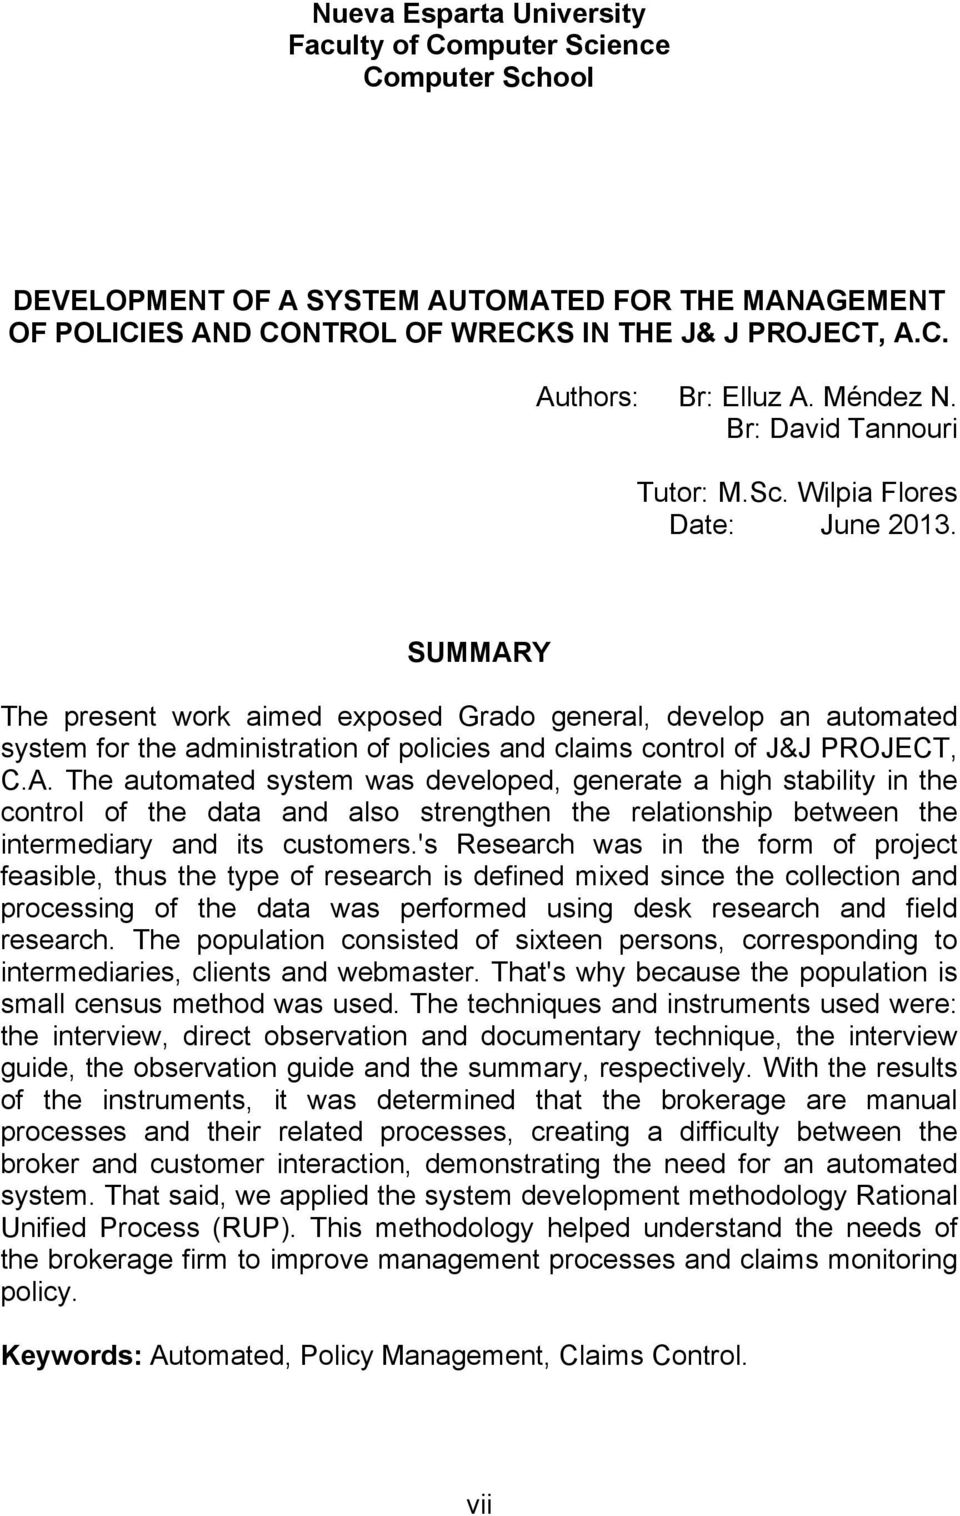 SUMMARY The present work aimed exposed Grado general, develop an automated system for the administration of policies and claims control of J&J PROJECT, C.A. The automated system was developed, generate a high stability in the control of the data and also strengthen the relationship between the intermediary and its customers.